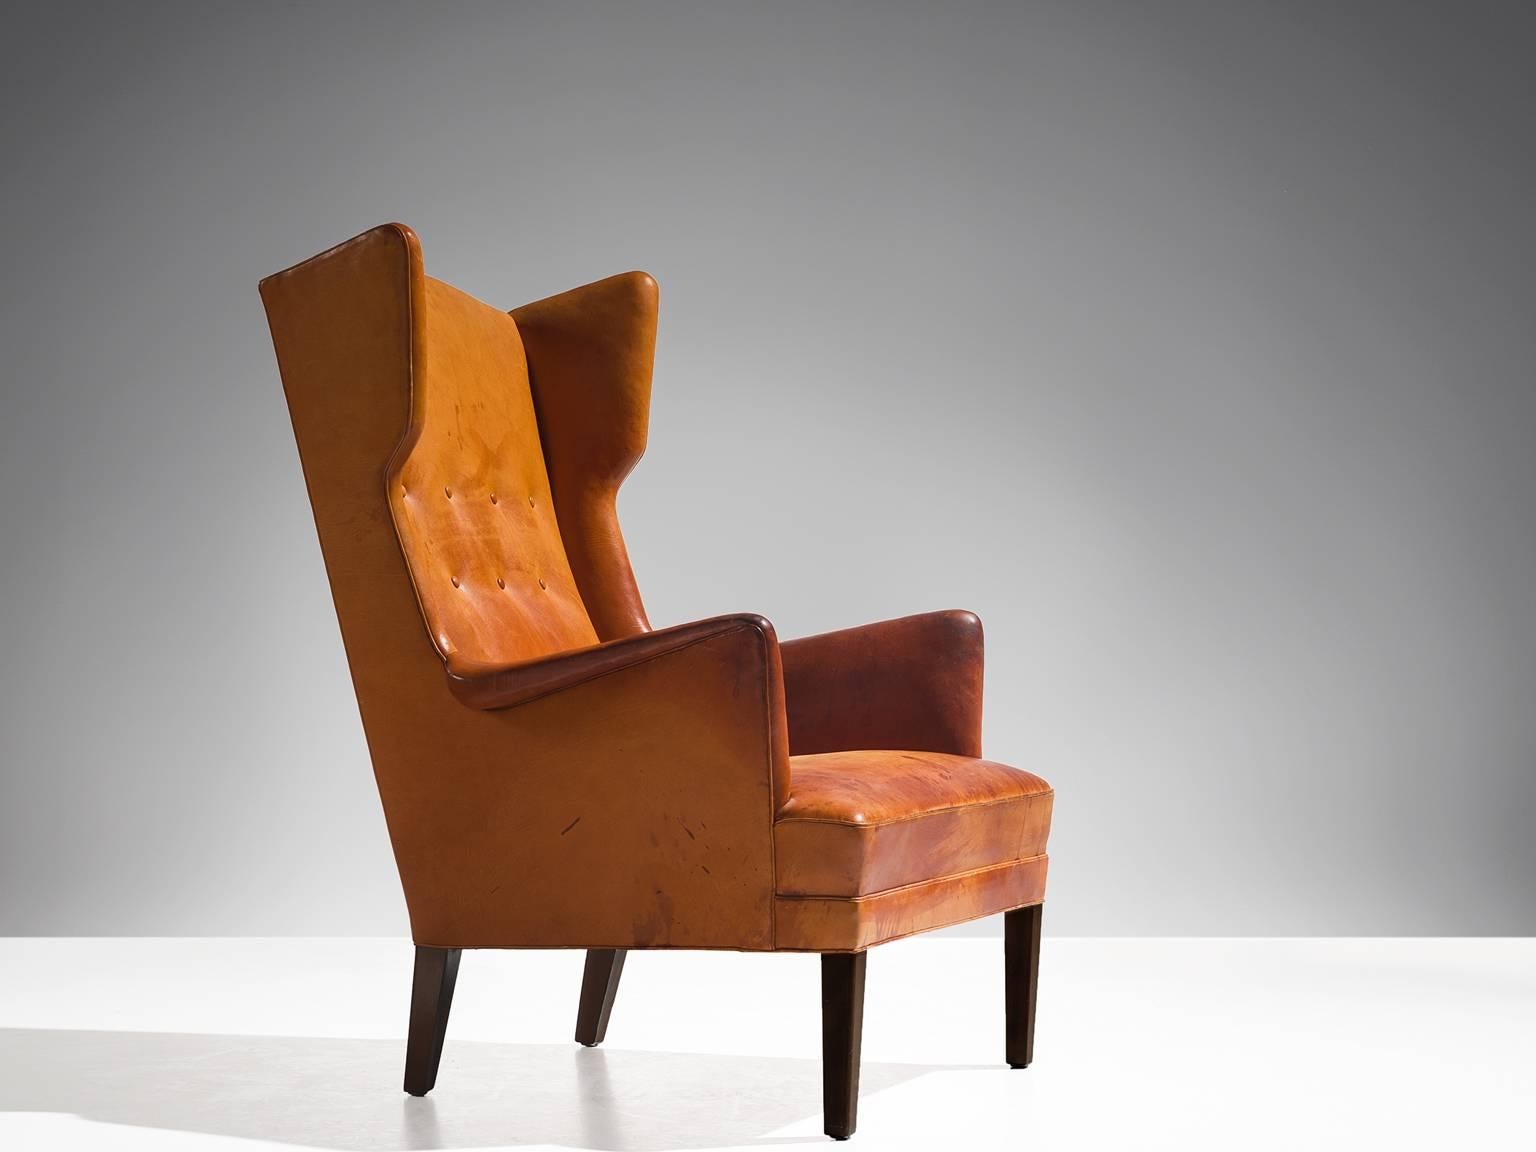 Frits Henningsen, lounge chair, cognac leather and stained wood, Denmark, 1950s. 

Rare wingback chair attributed to the Danish designer Frits Henningsen. This chair shows the lines of a classical chair, yet combined with just enough modern